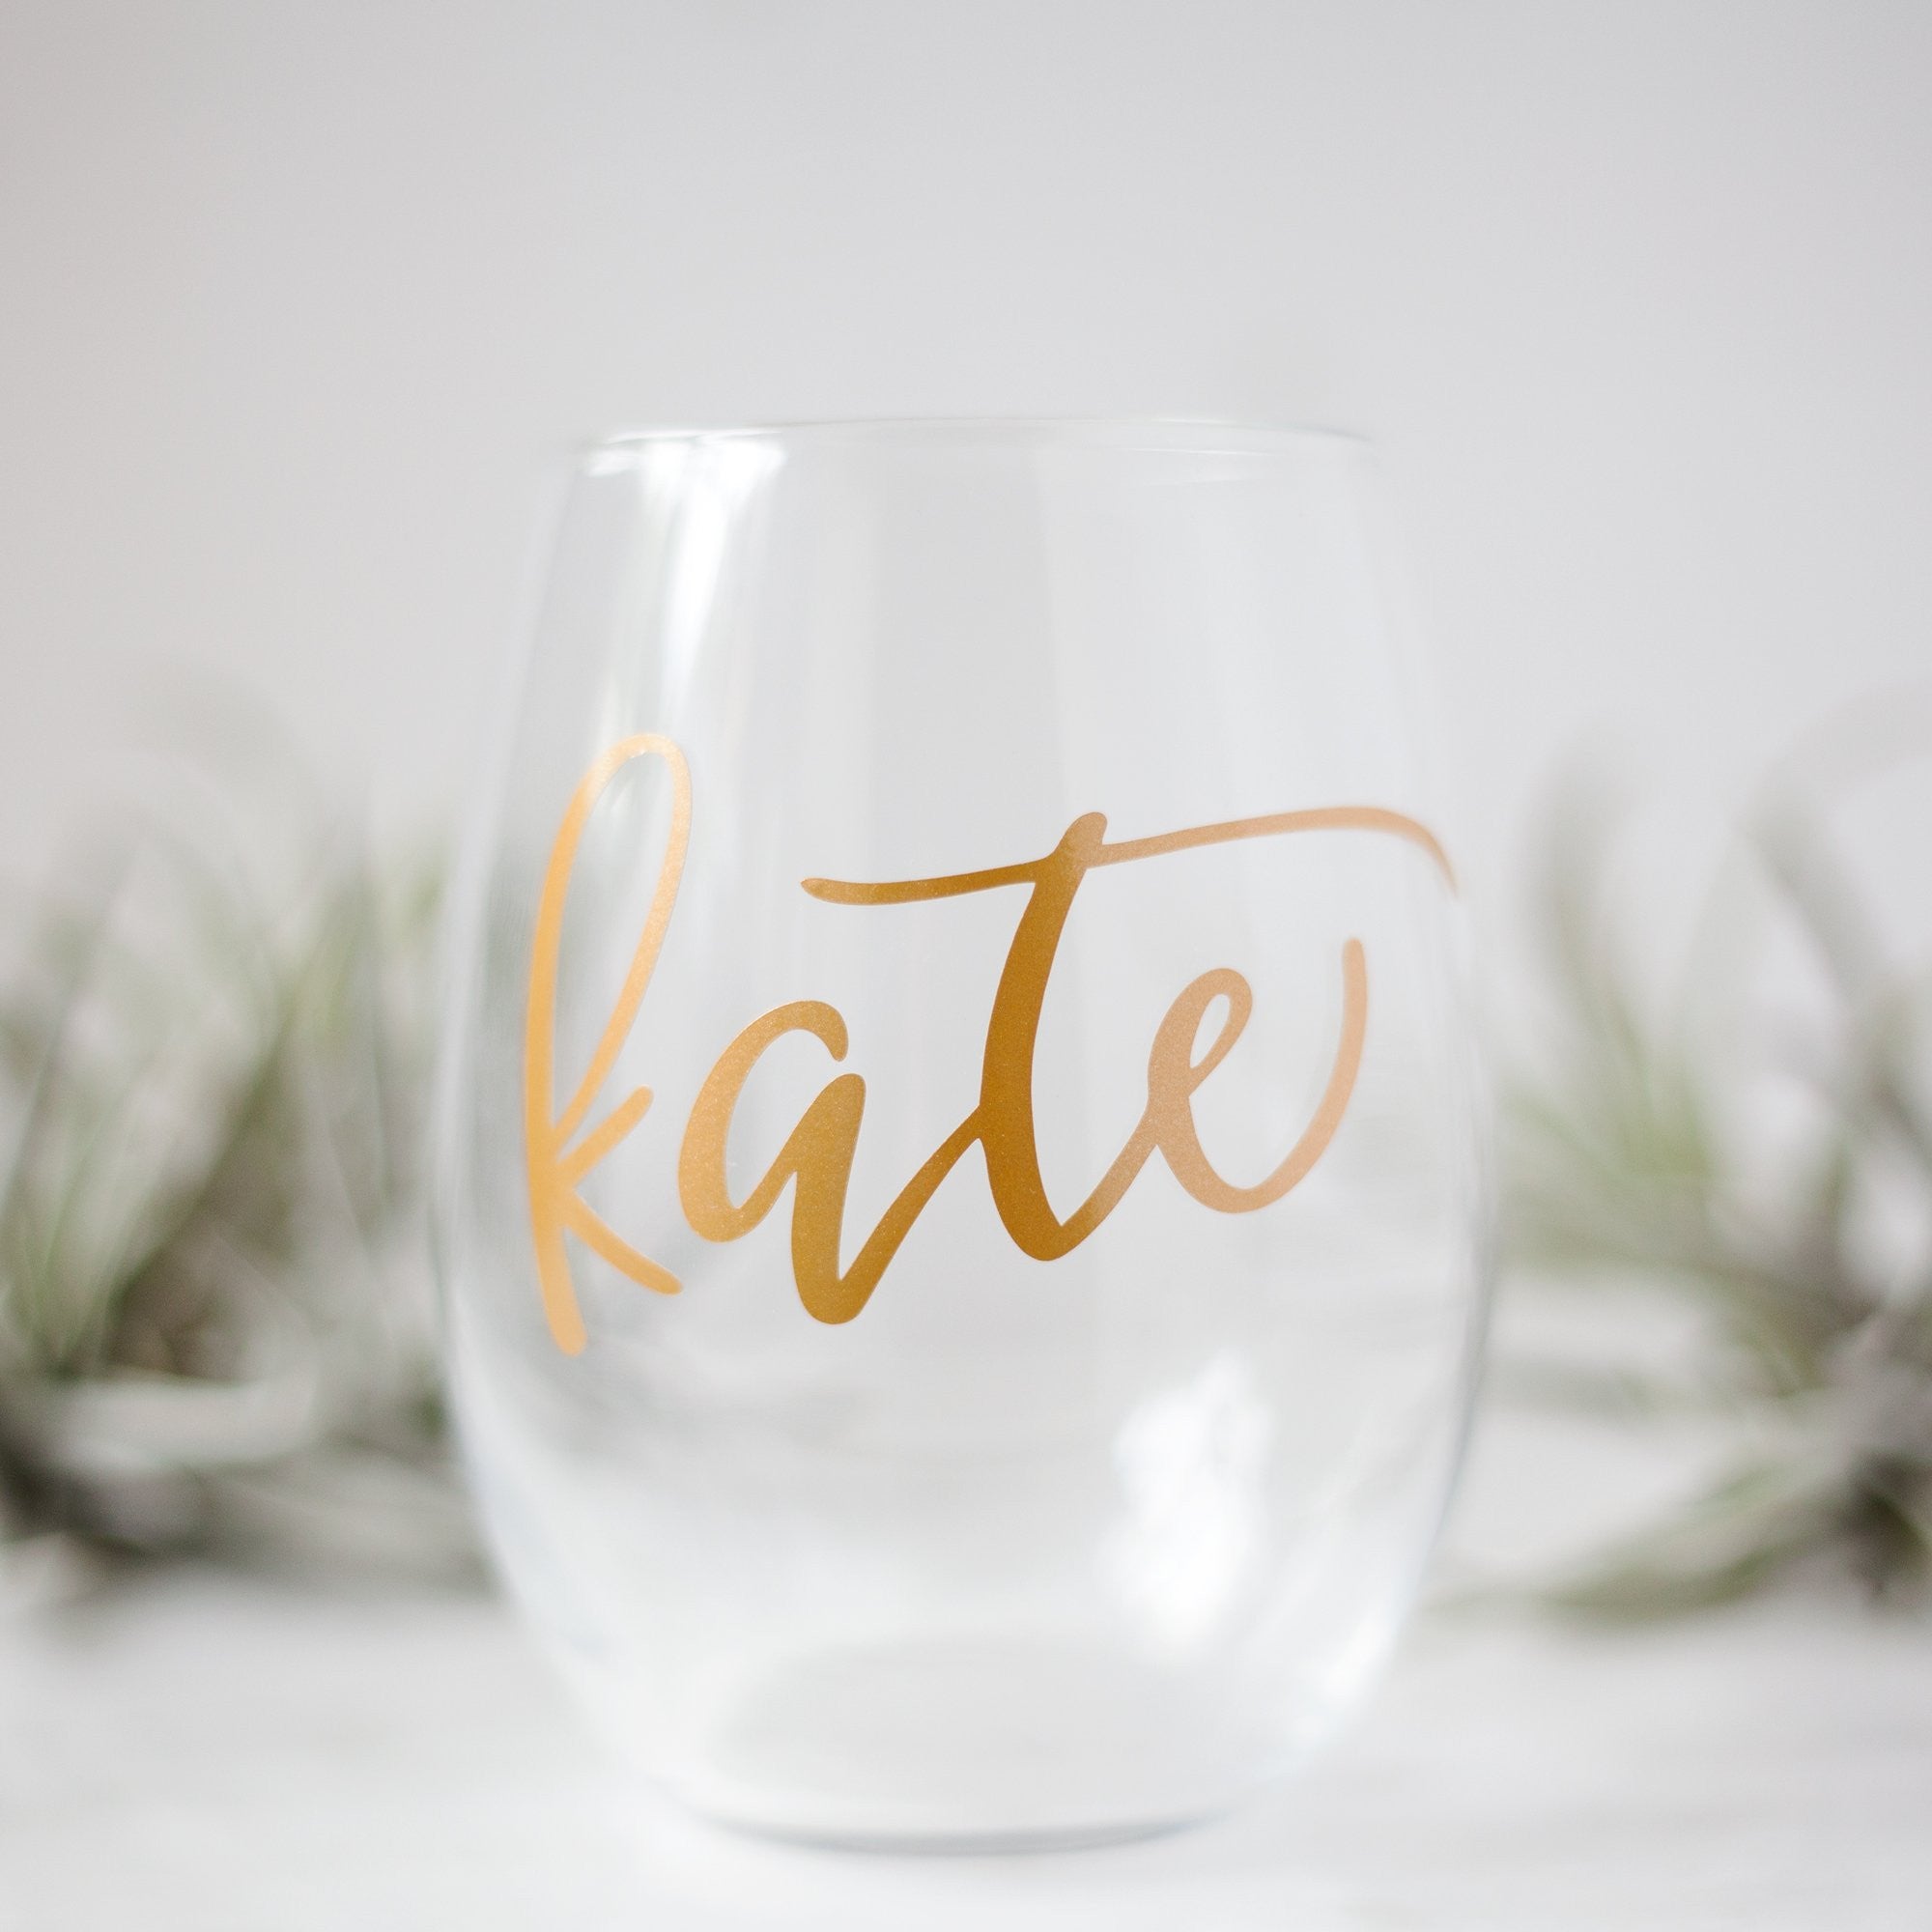 Personalized Stemless Wine Glass for Couples